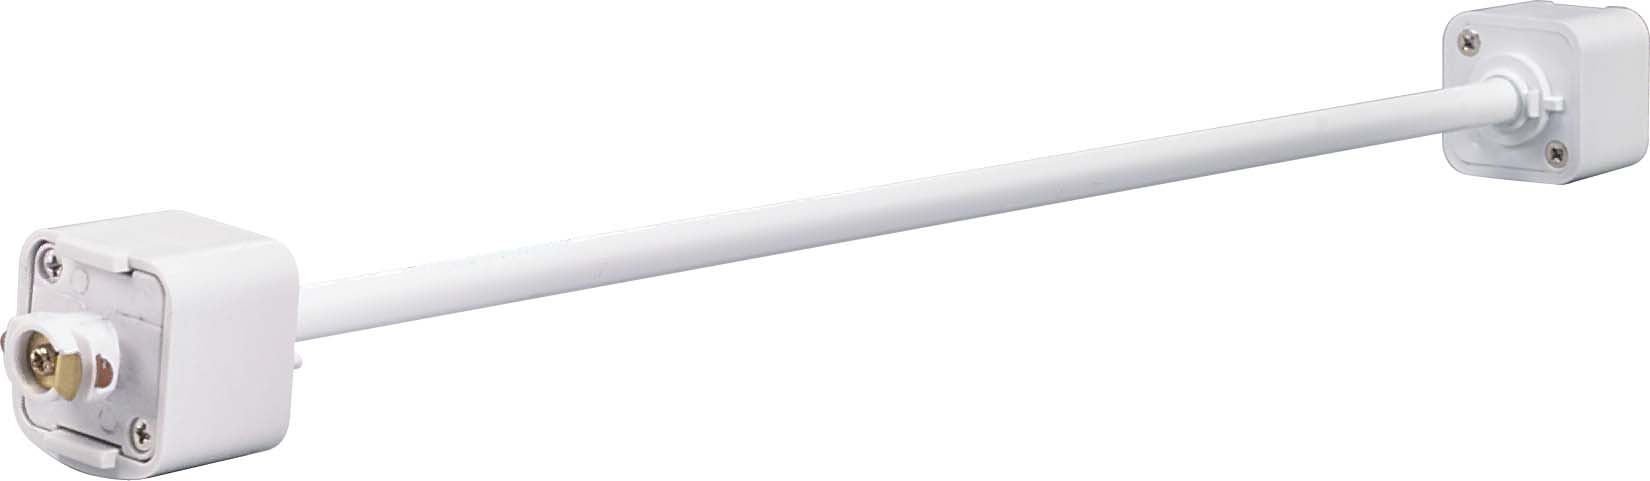 SATCO/NUVO 24 Inch Extension Wand White Finish (TP160)